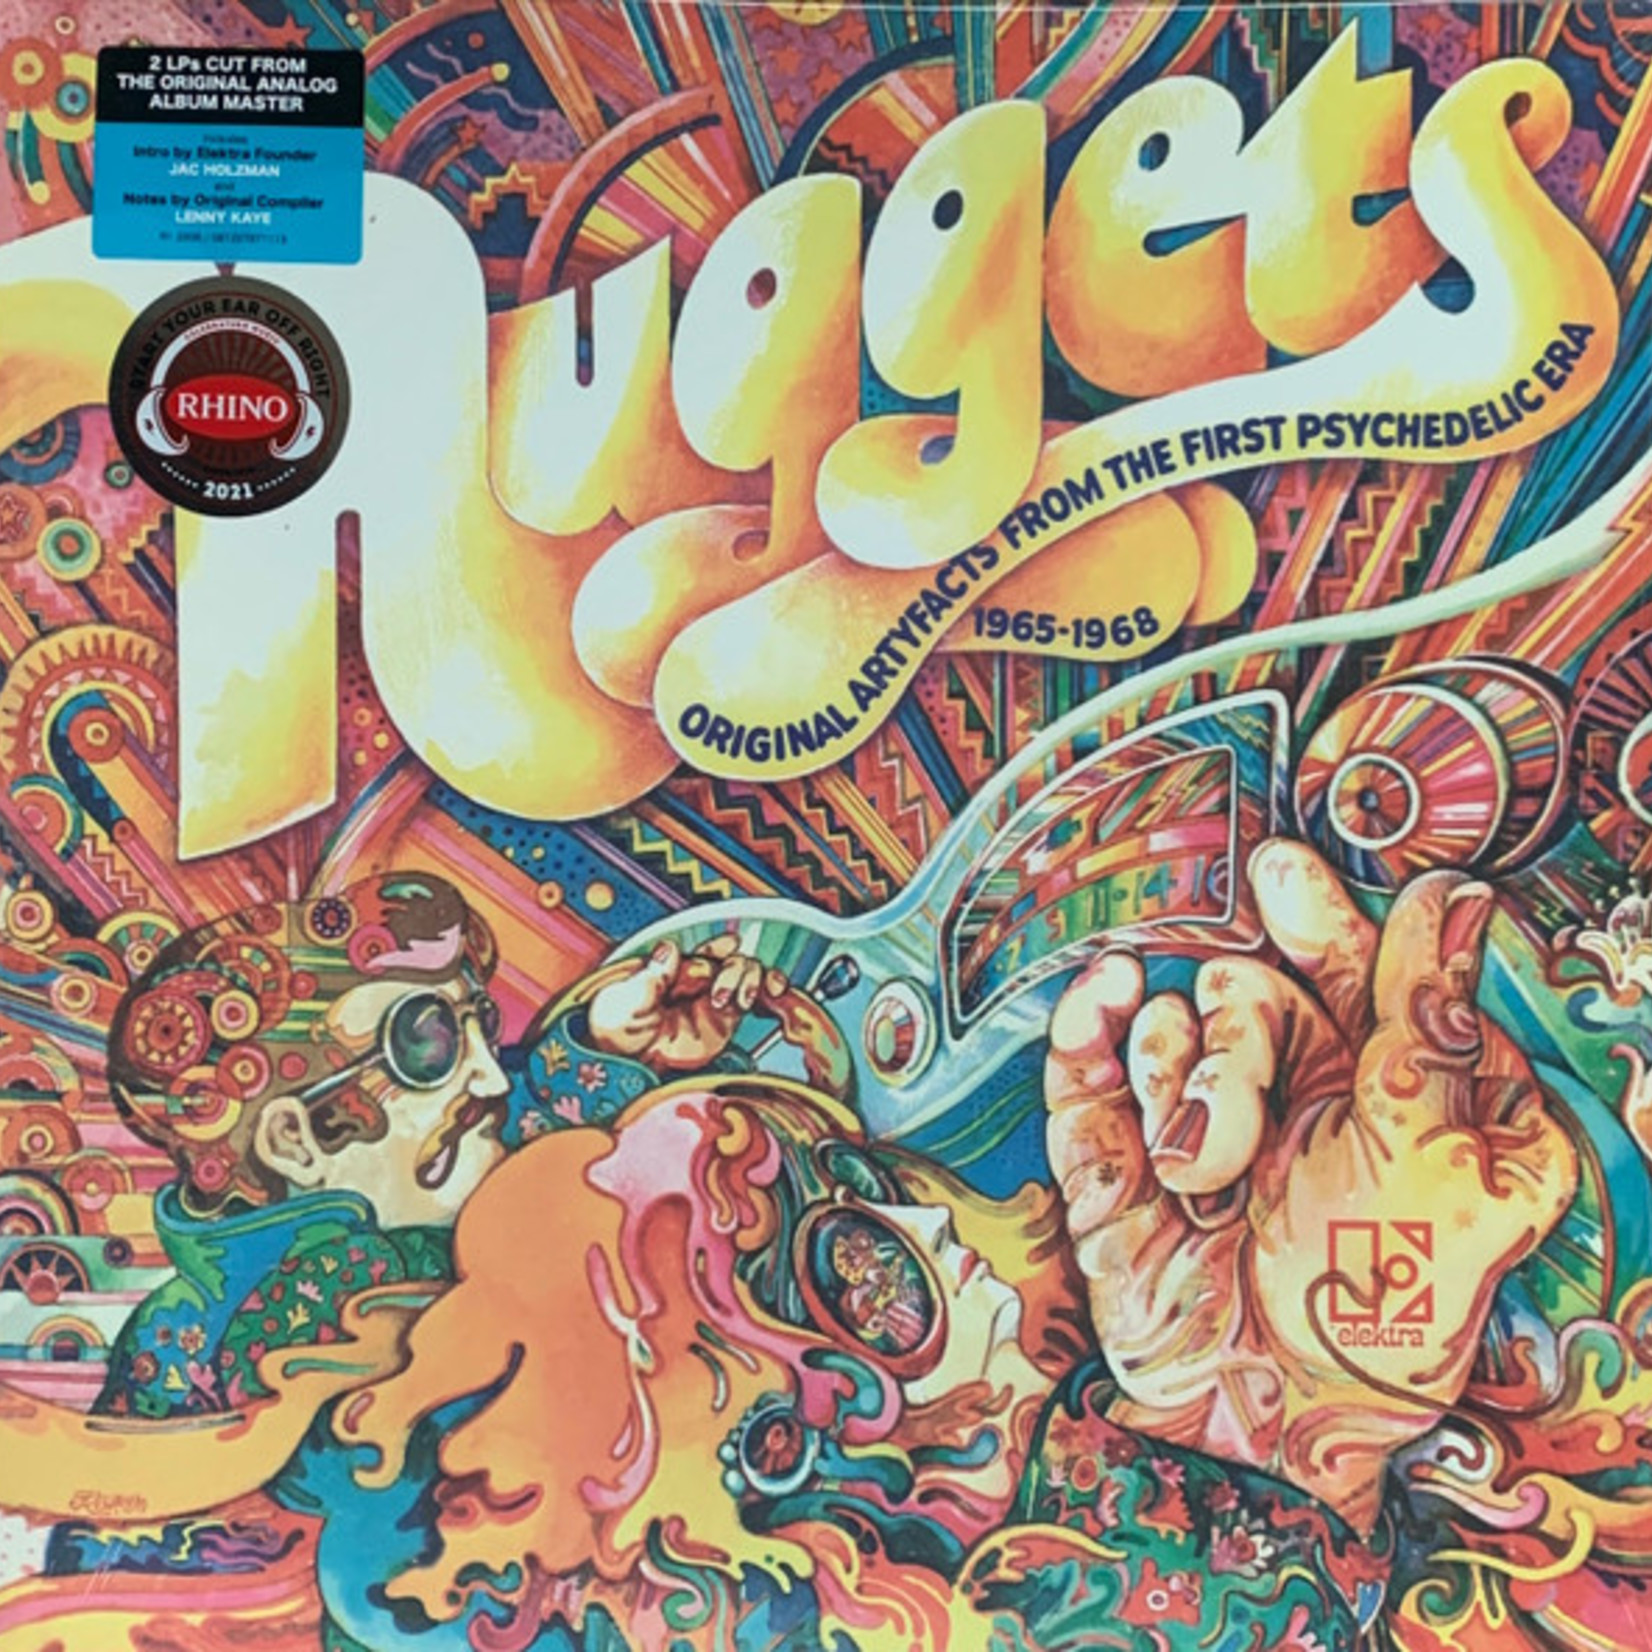 V/A - Nuggets: The Original Artyfacts From The First Psychedelic Era, 1965-1968 (40th Anniversary Edition)